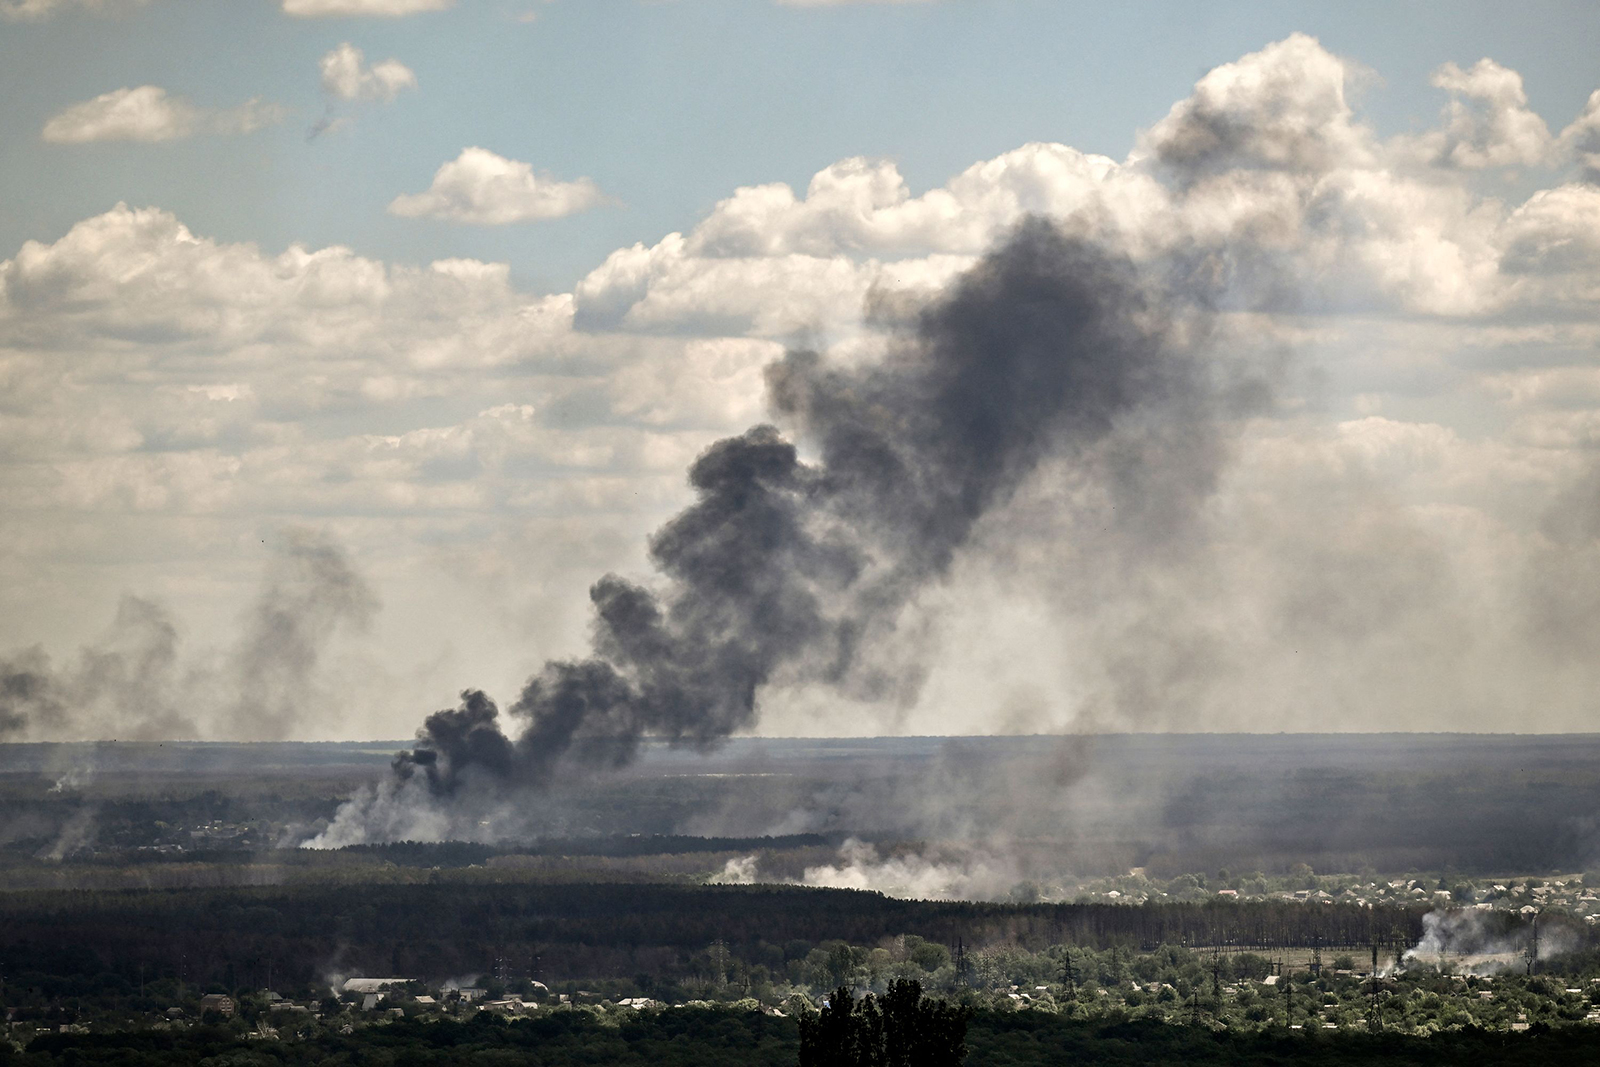 Smoke and dirt rise from shelling in the city of Severodonetsk during fight between Ukrainian and Russian troops in the eastern Ukrainian region of Donbas on June 7.